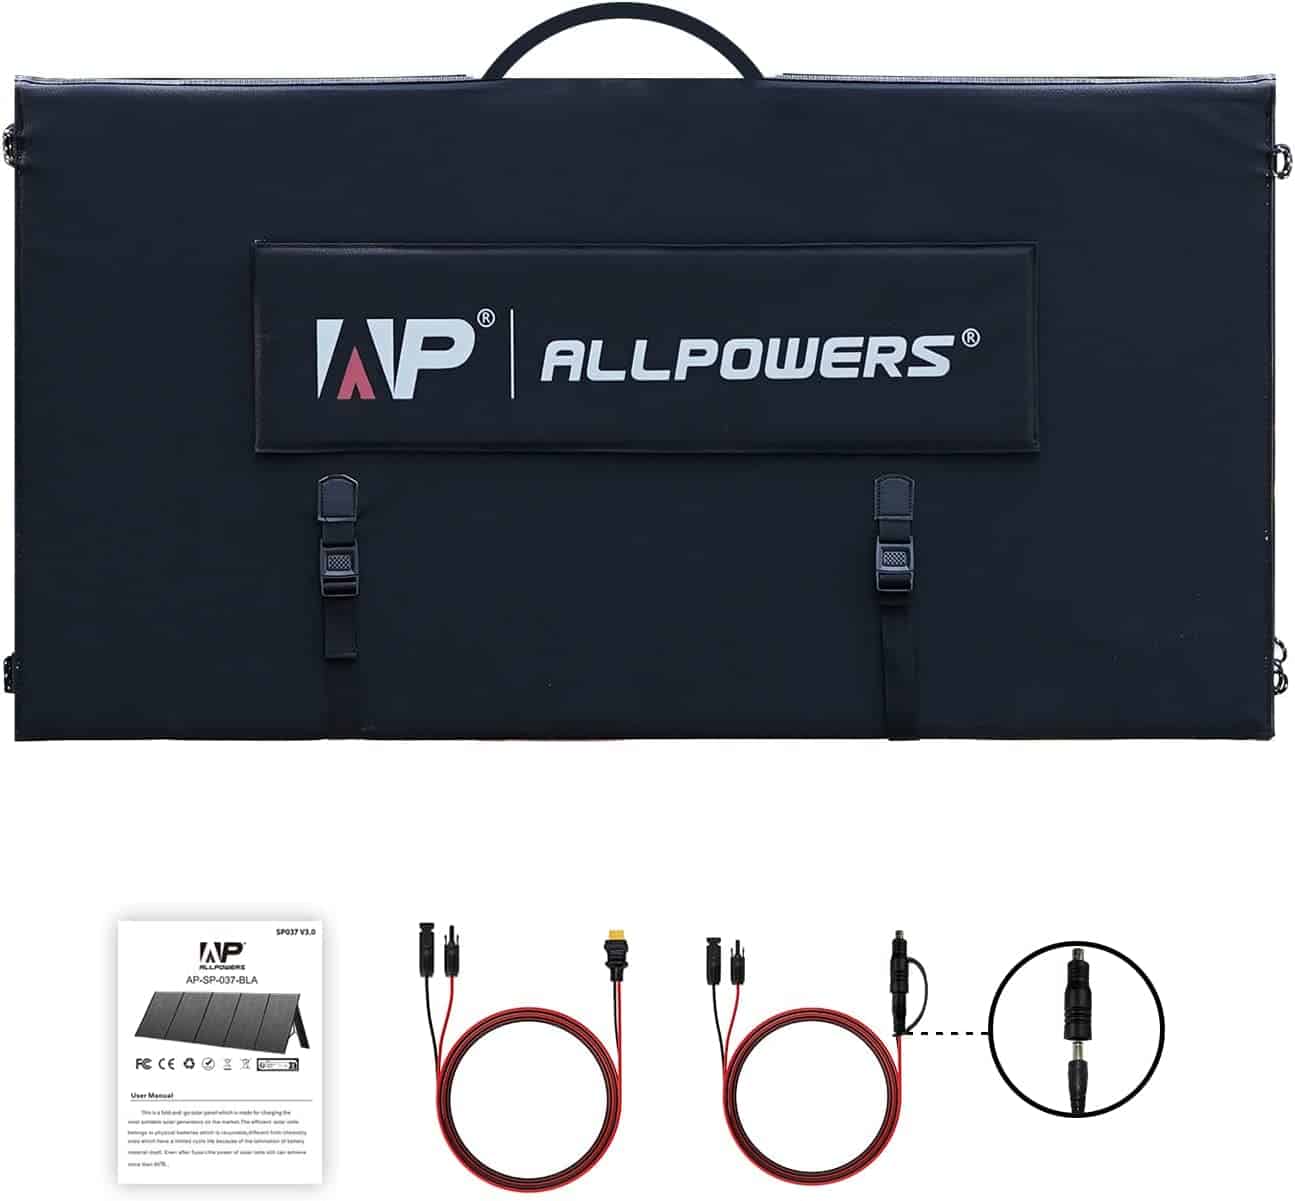 ALLPOWERS SP037 Portable Solar Panel 400W Review